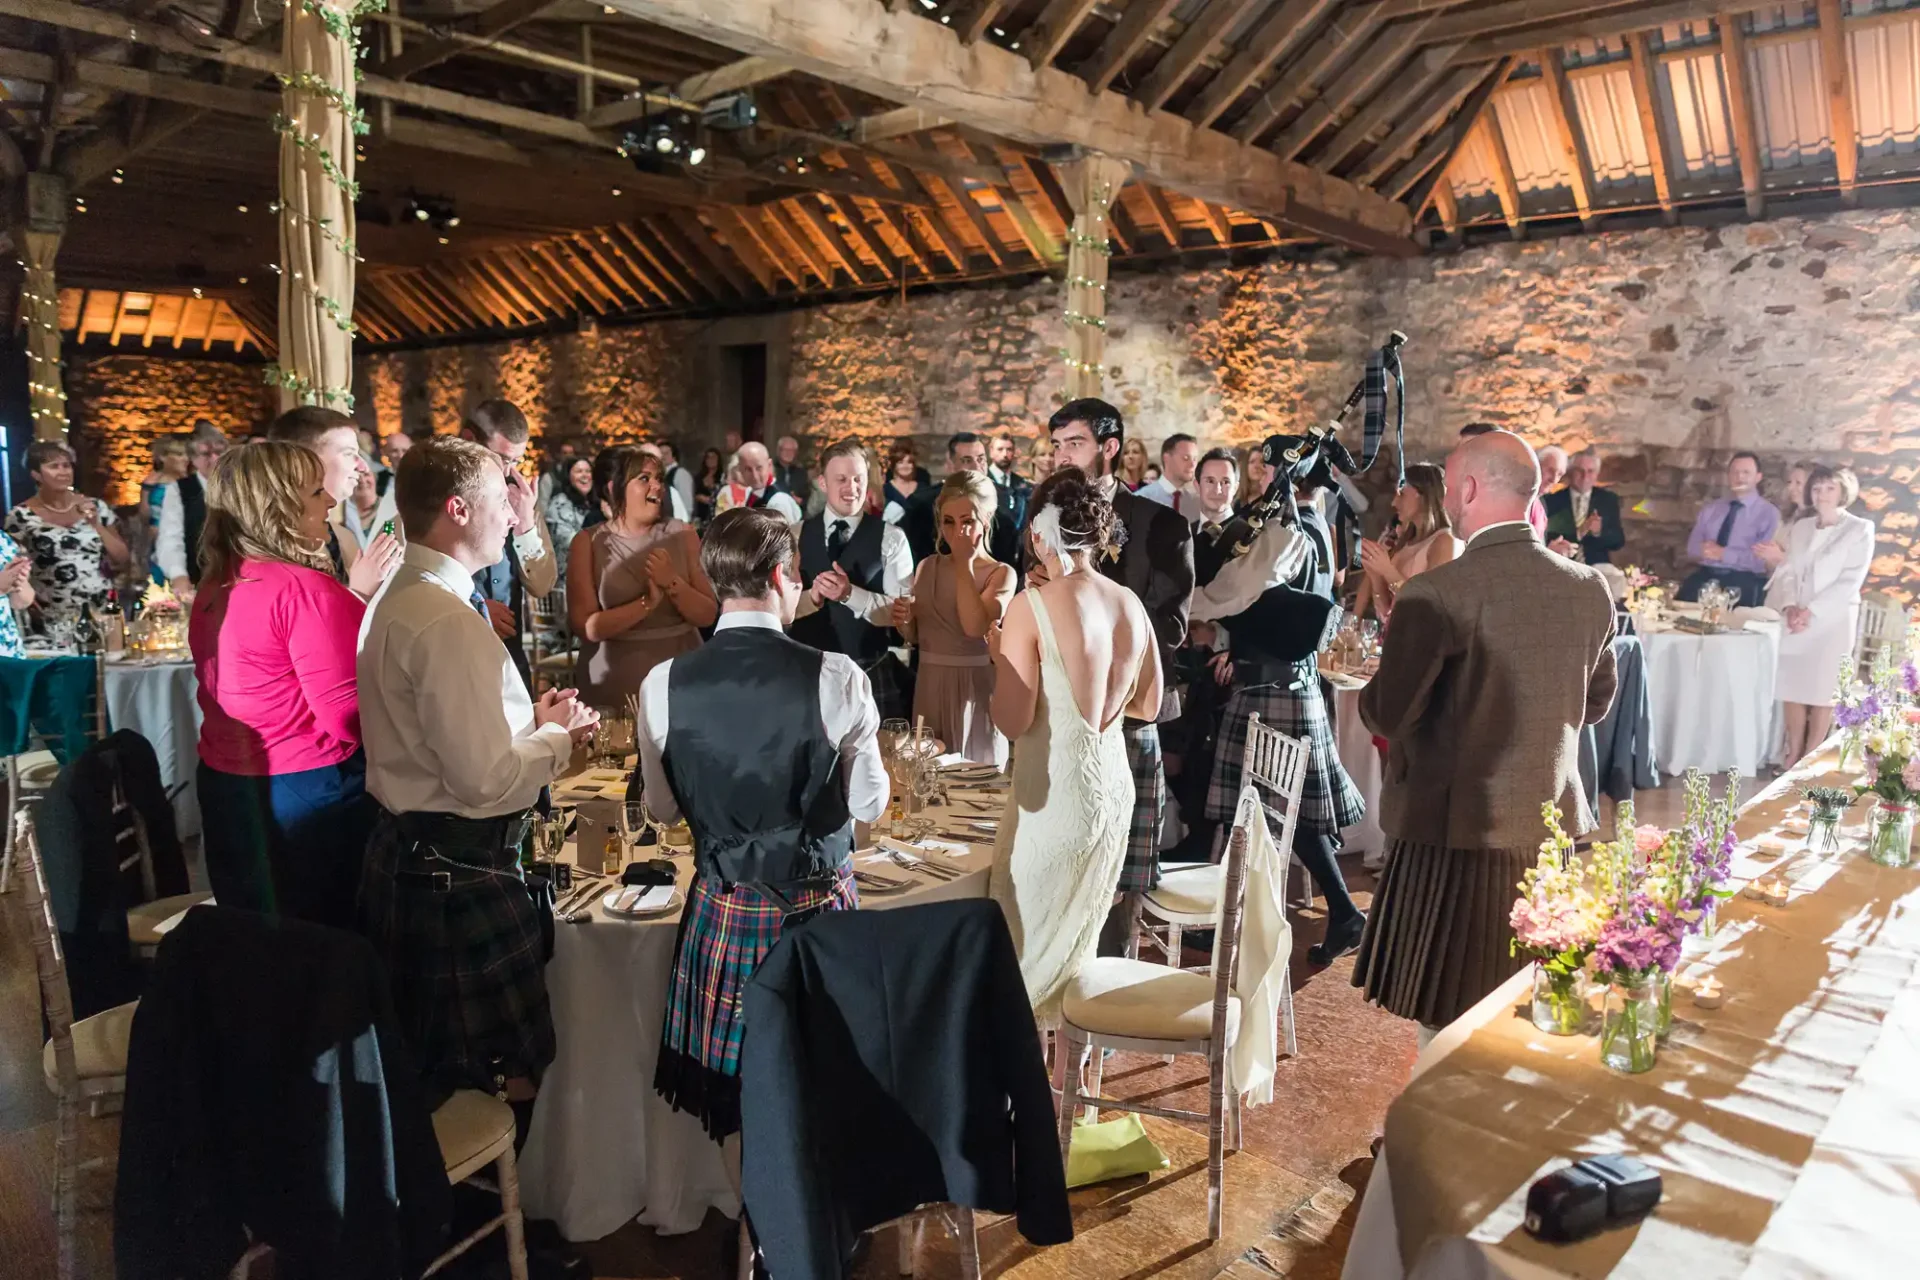 A wedding reception in a rustic stone barn, with guests standing and applauding the bride and groom at the head table.